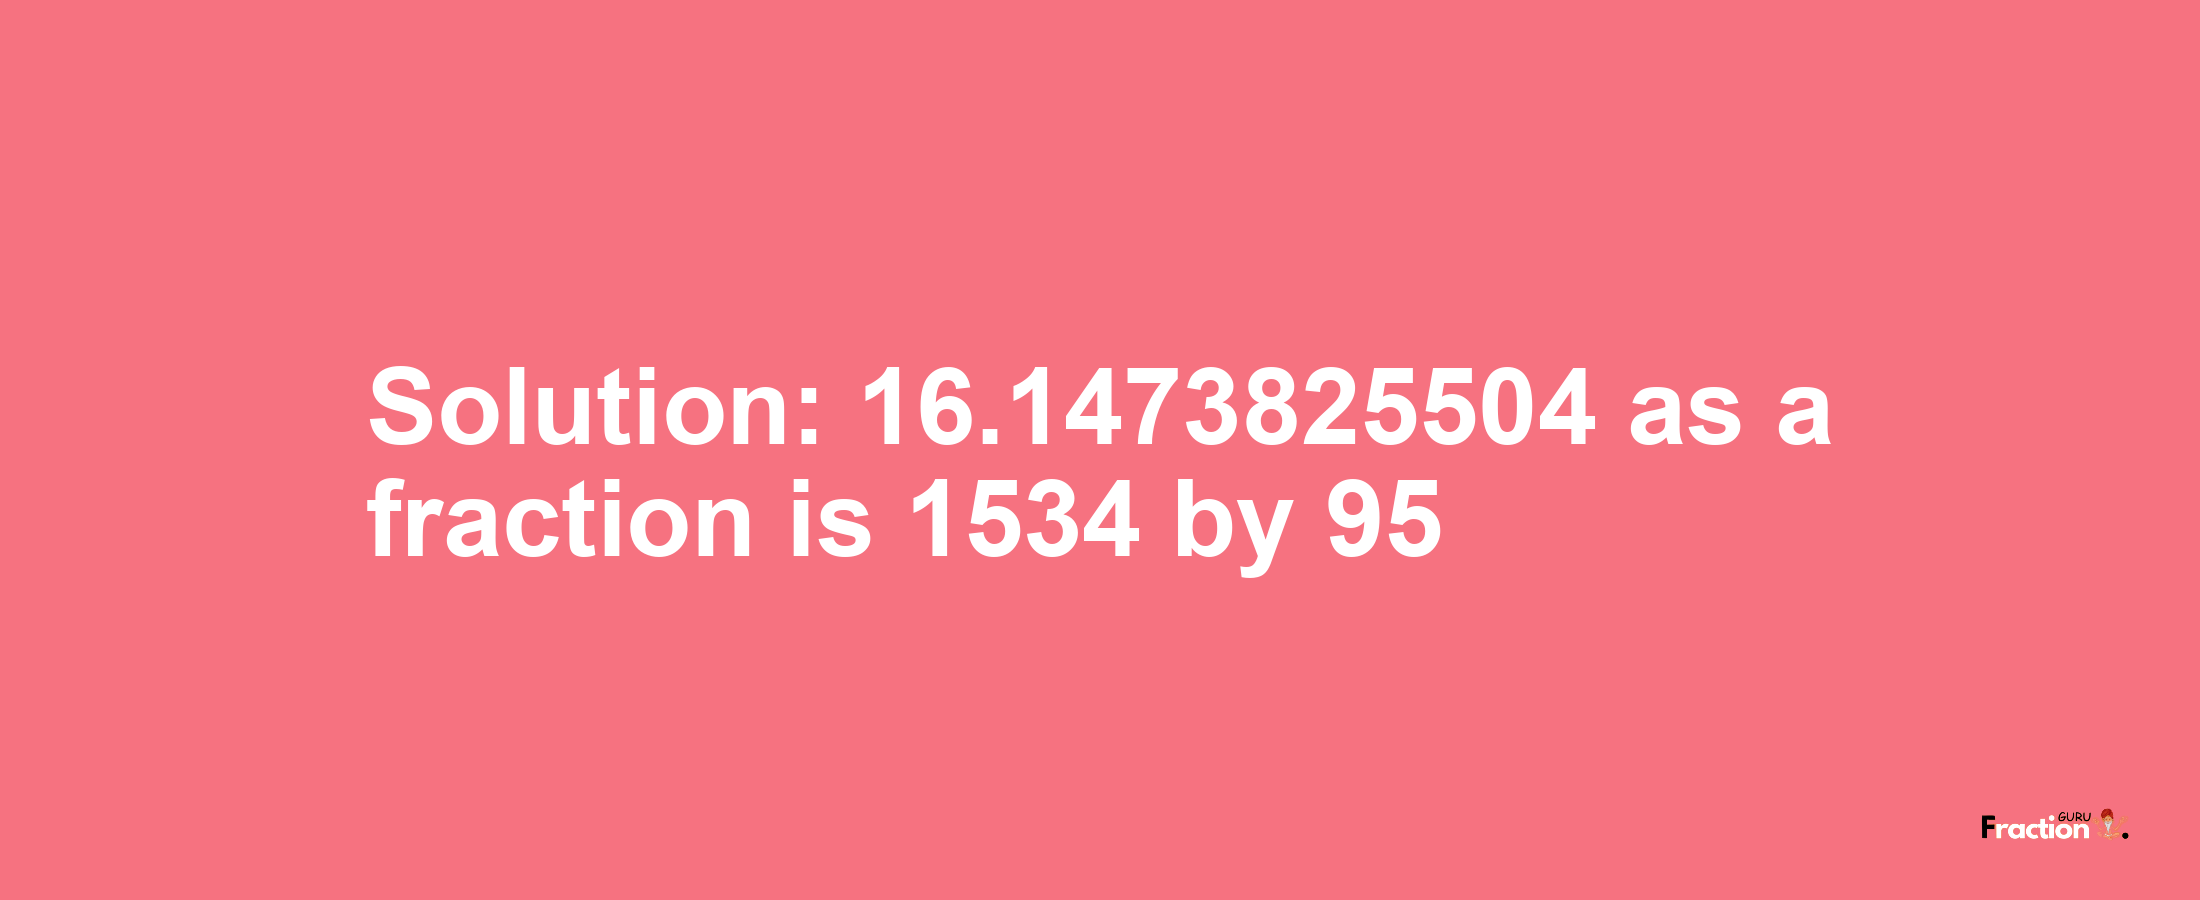 Solution:16.1473825504 as a fraction is 1534/95